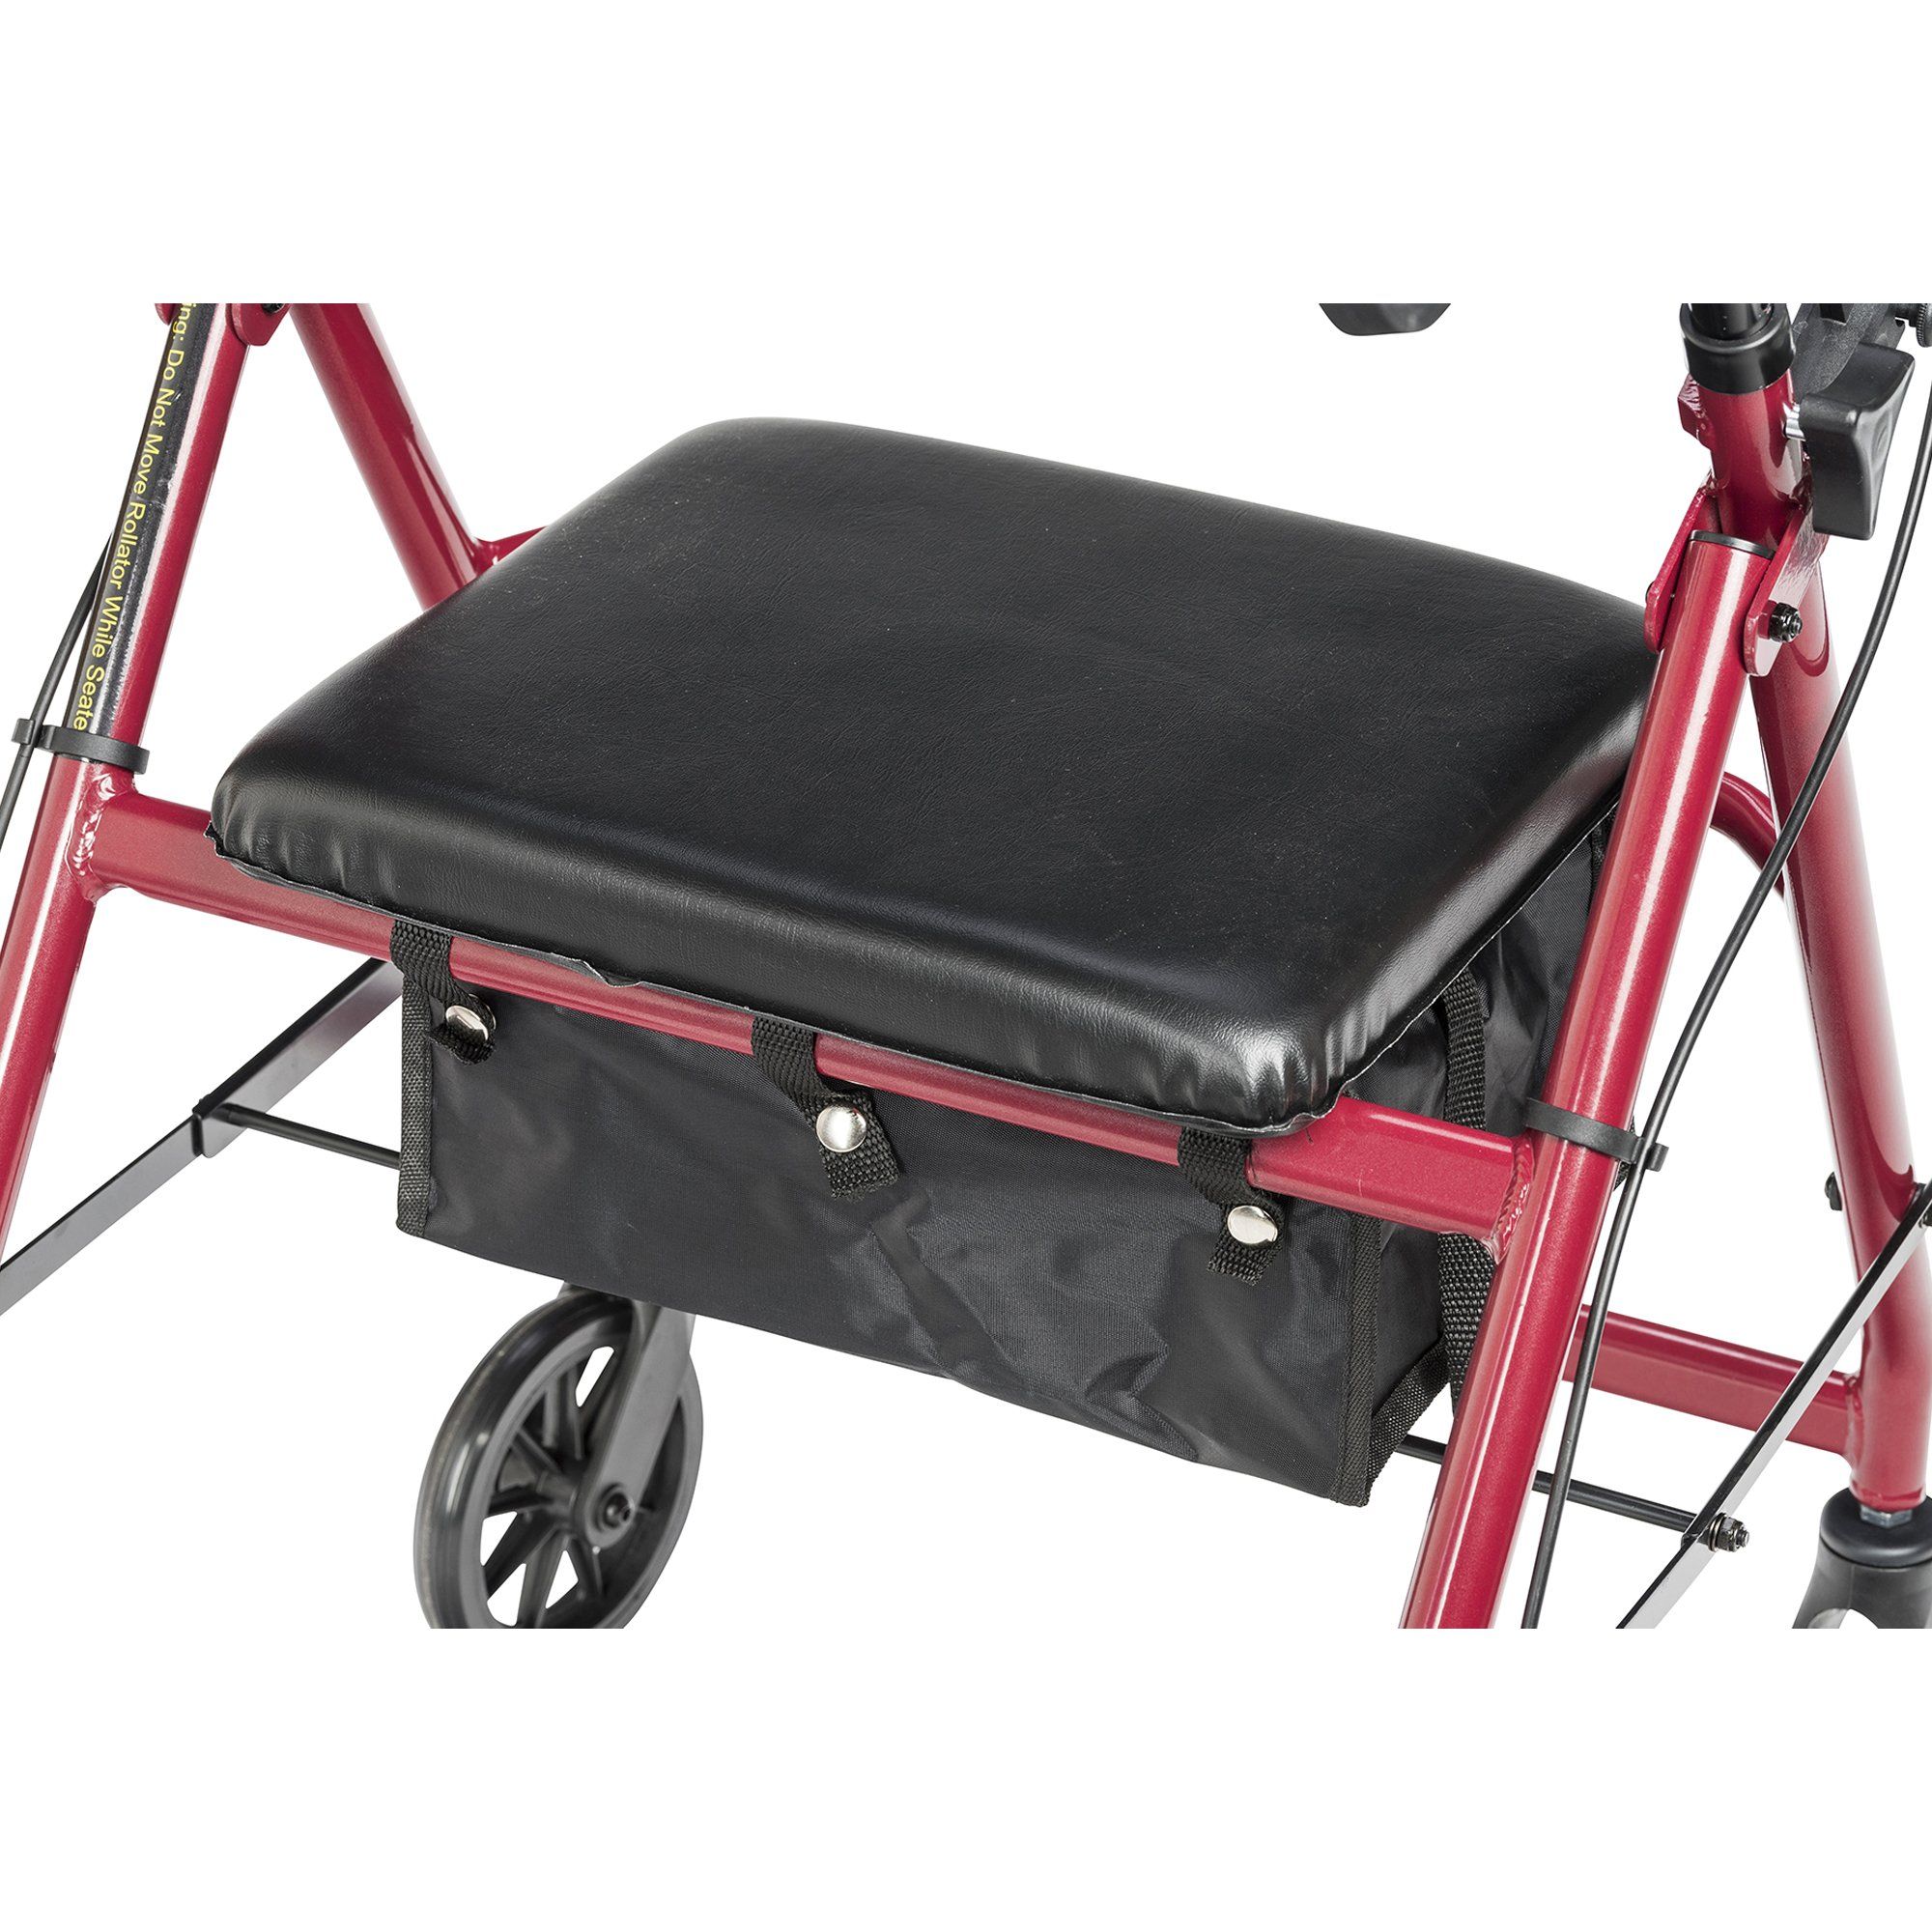 McKesson Rollator Walker with Seat, Red - 300 lbs Capacity